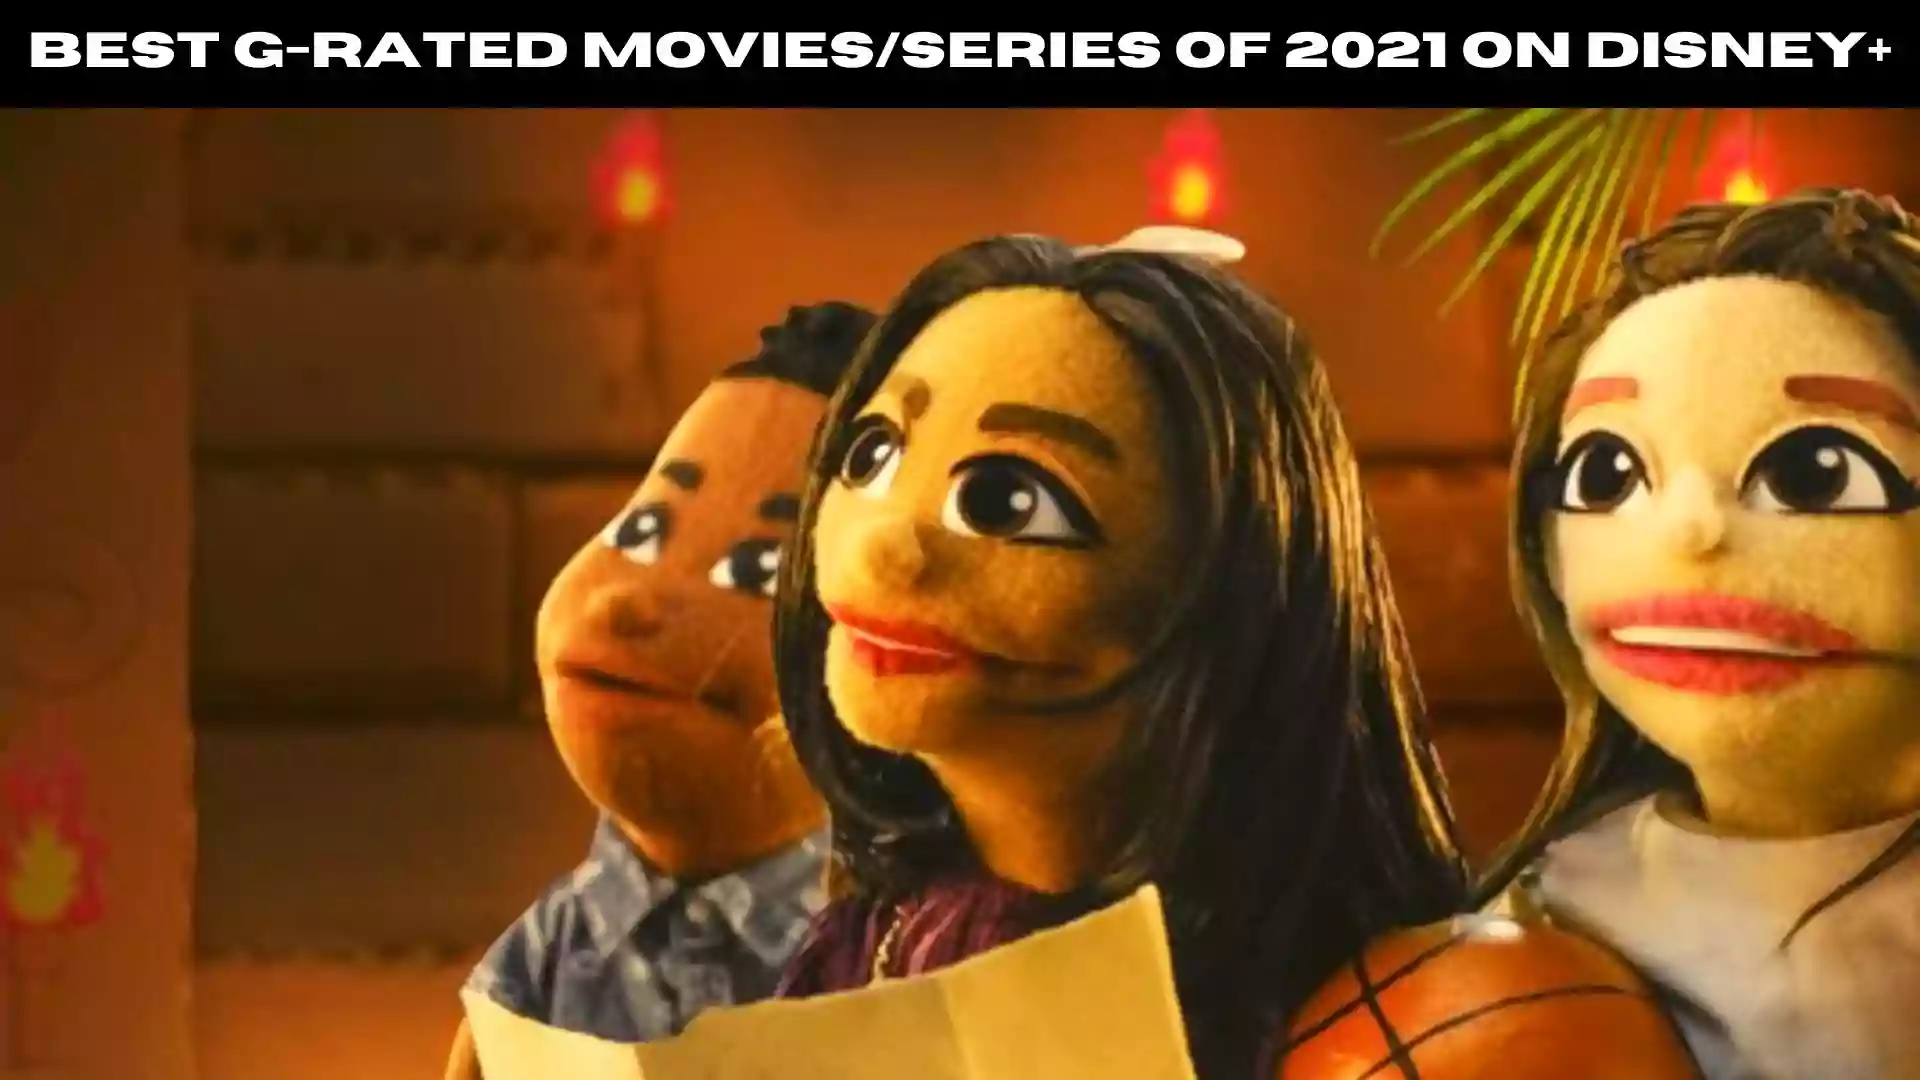 Best G-Rated Movies/series of 2021 on Disney+